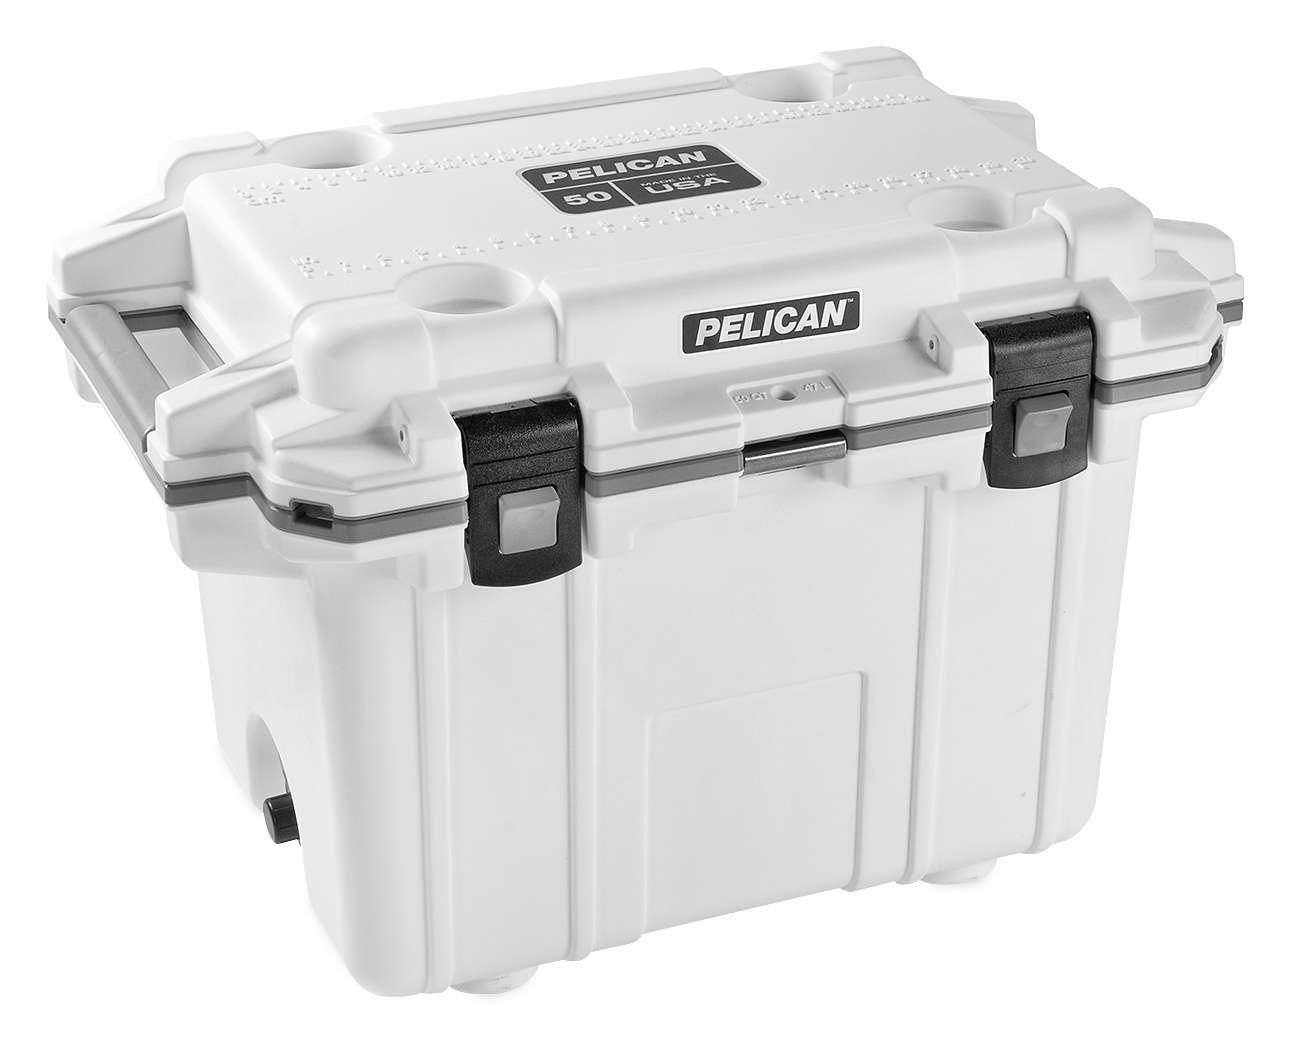 4PUT-PELICAN-P-50Q-1-WHTGRY 50 qt. Injection-Molded Cooler - White/Gray